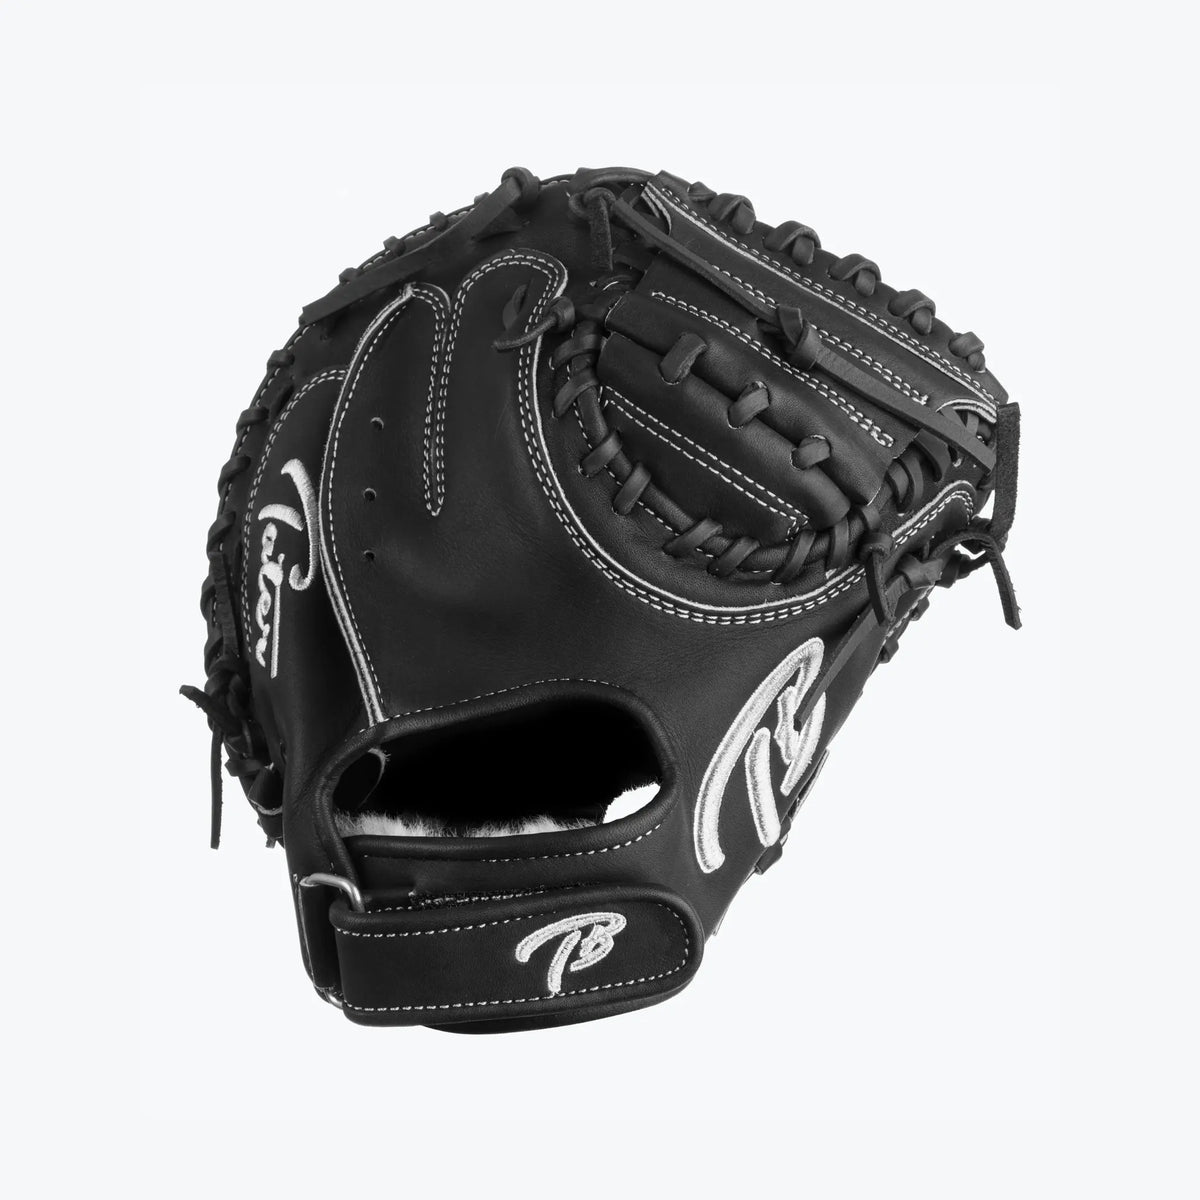 The image captures a Tater Baseball 28-inch Mini Catcher&#39;s Mitt Trainer, designed in classic black with stylish white stitching and logo detail. Its small pocket is perfect for training catchers to secure and handle the ball with precision. Ideal for refining skills on the field.